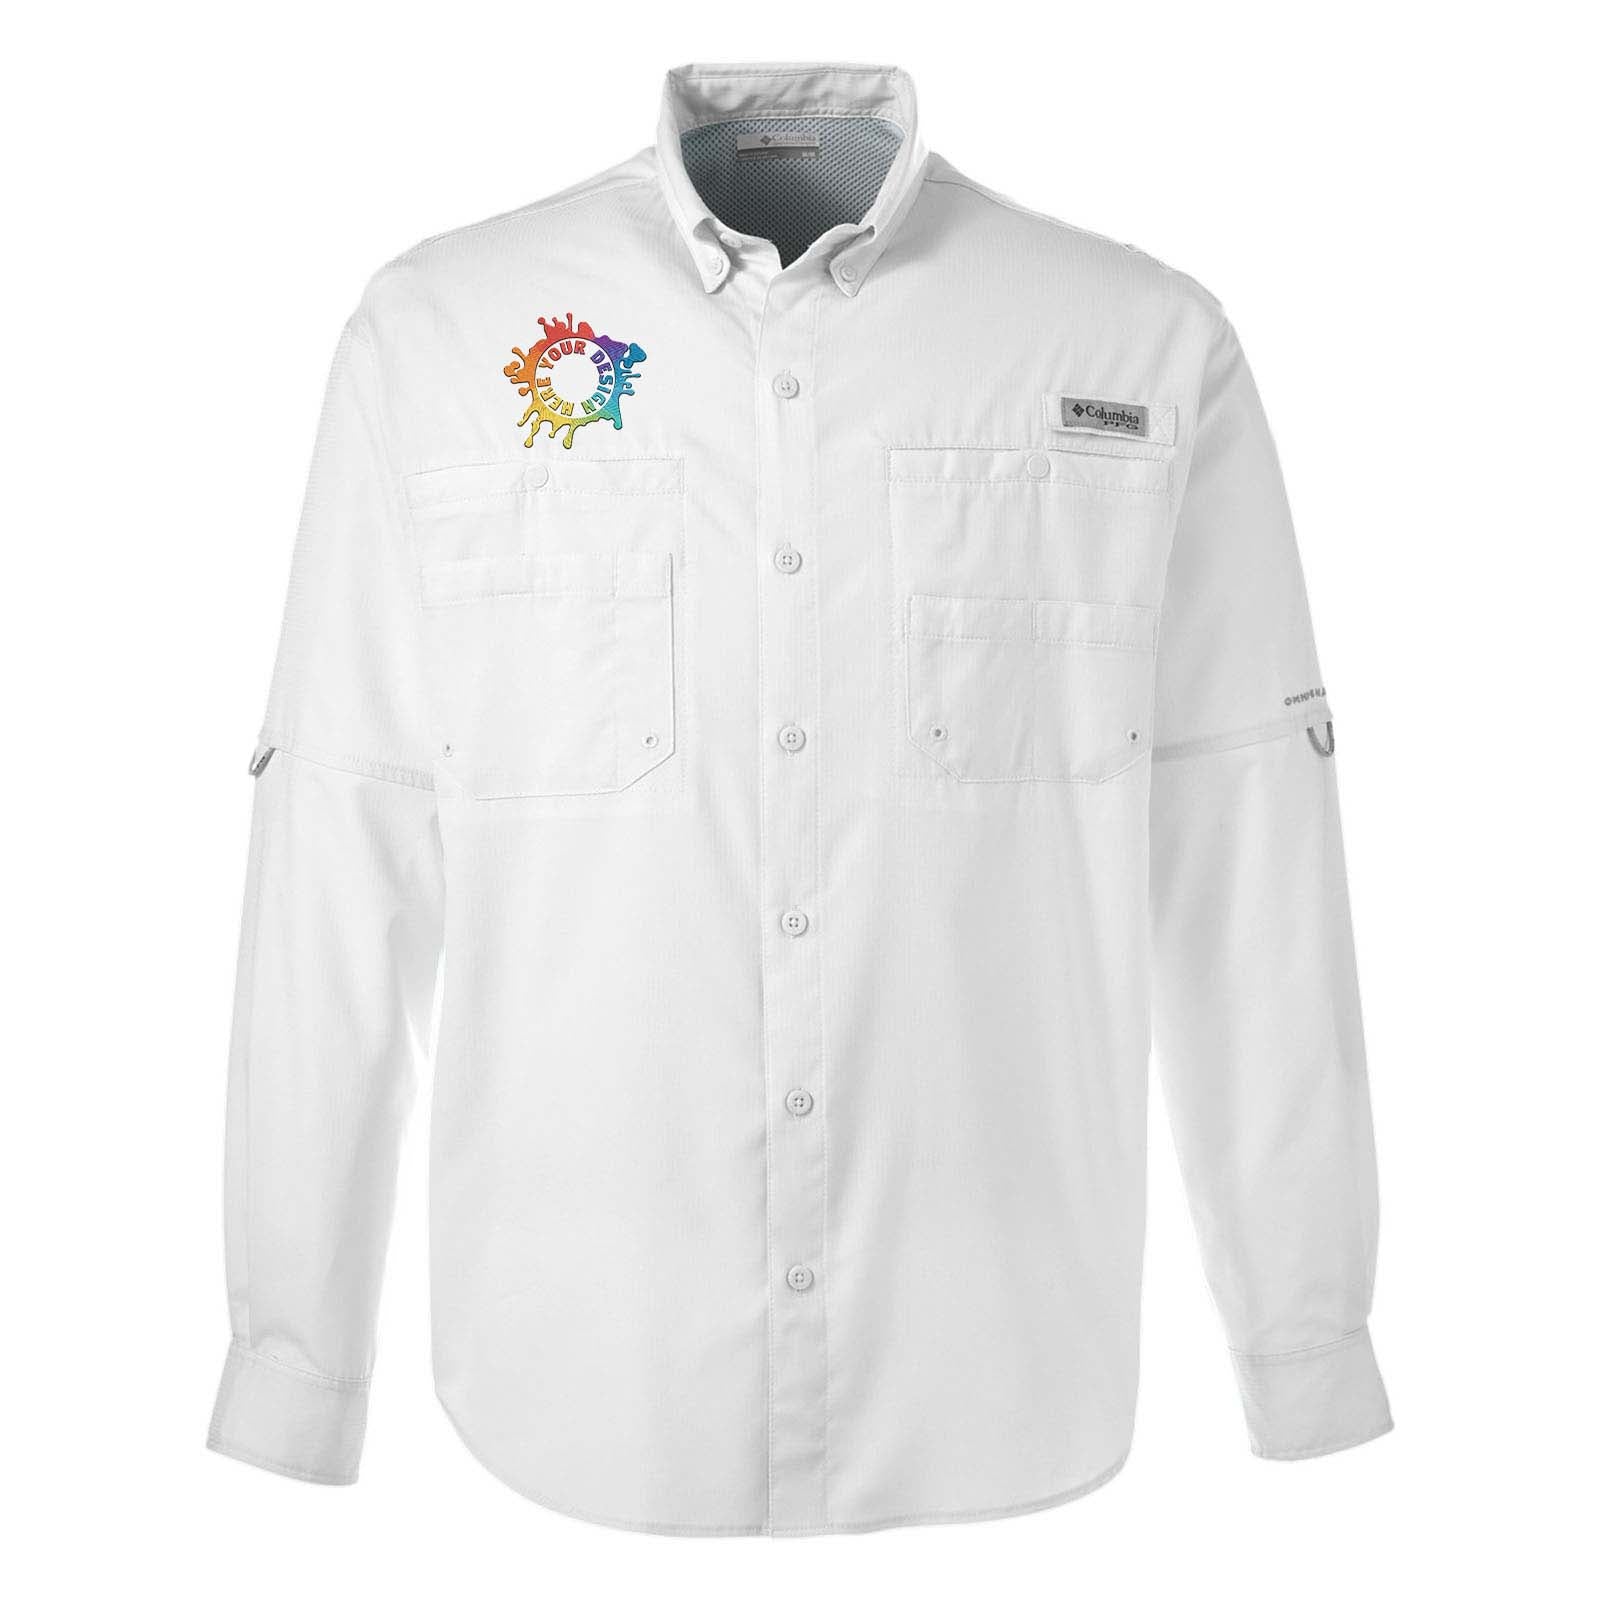 Columbia Men's Tamiami II Long-Sleeve Shirt Embroidery White / x Large